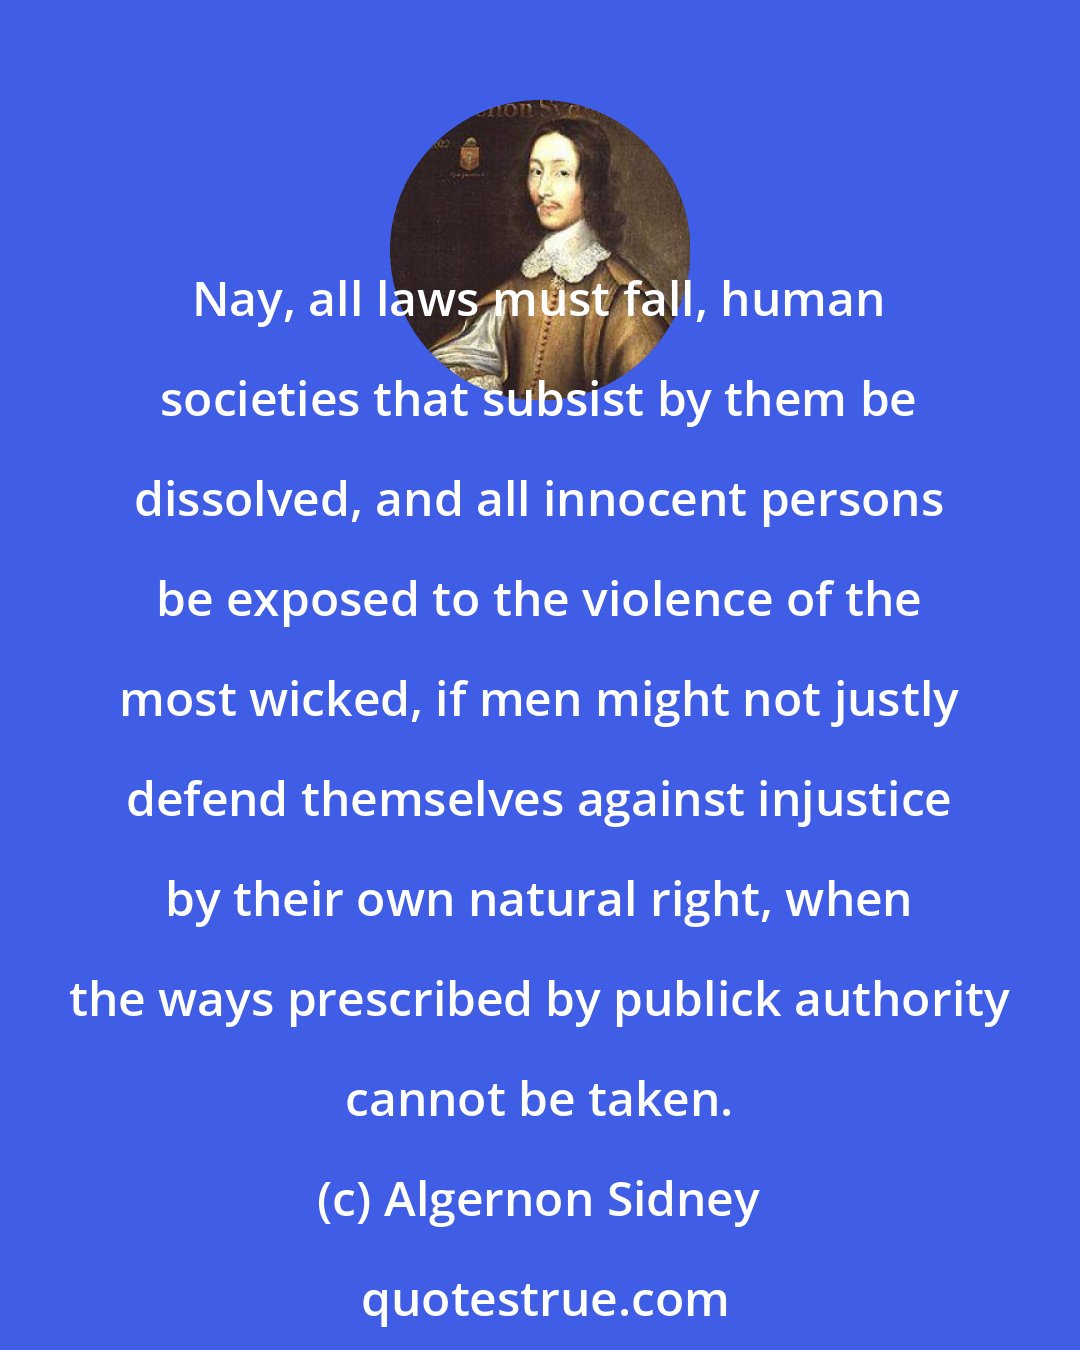 Algernon Sidney: Nay, all laws must fall, human societies that subsist by them be dissolved, and all innocent persons be exposed to the violence of the most wicked, if men might not justly defend themselves against injustice by their own natural right, when the ways prescribed by publick authority cannot be taken.